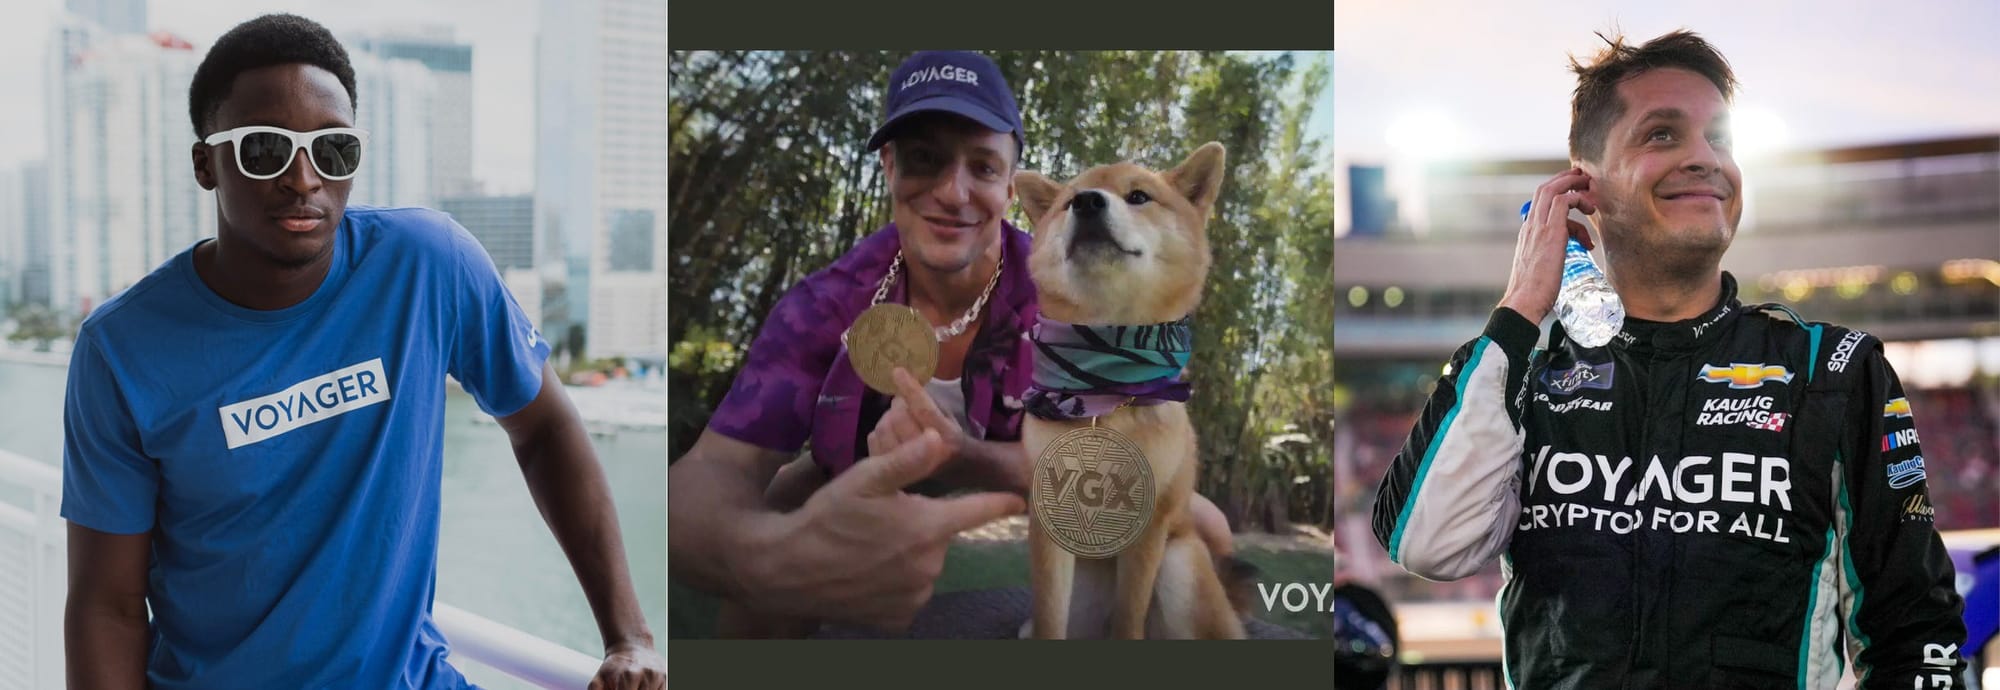 Photo collage of Victor Oladipo wearing a blue Voyager shirt and white sunglasses, Rob Gronkowski wearing a Voyager hat and pointing to a VGX medallion around the neck of a Shiba Inu, and Landon Cassill wearing a Voyager-branded racing suit